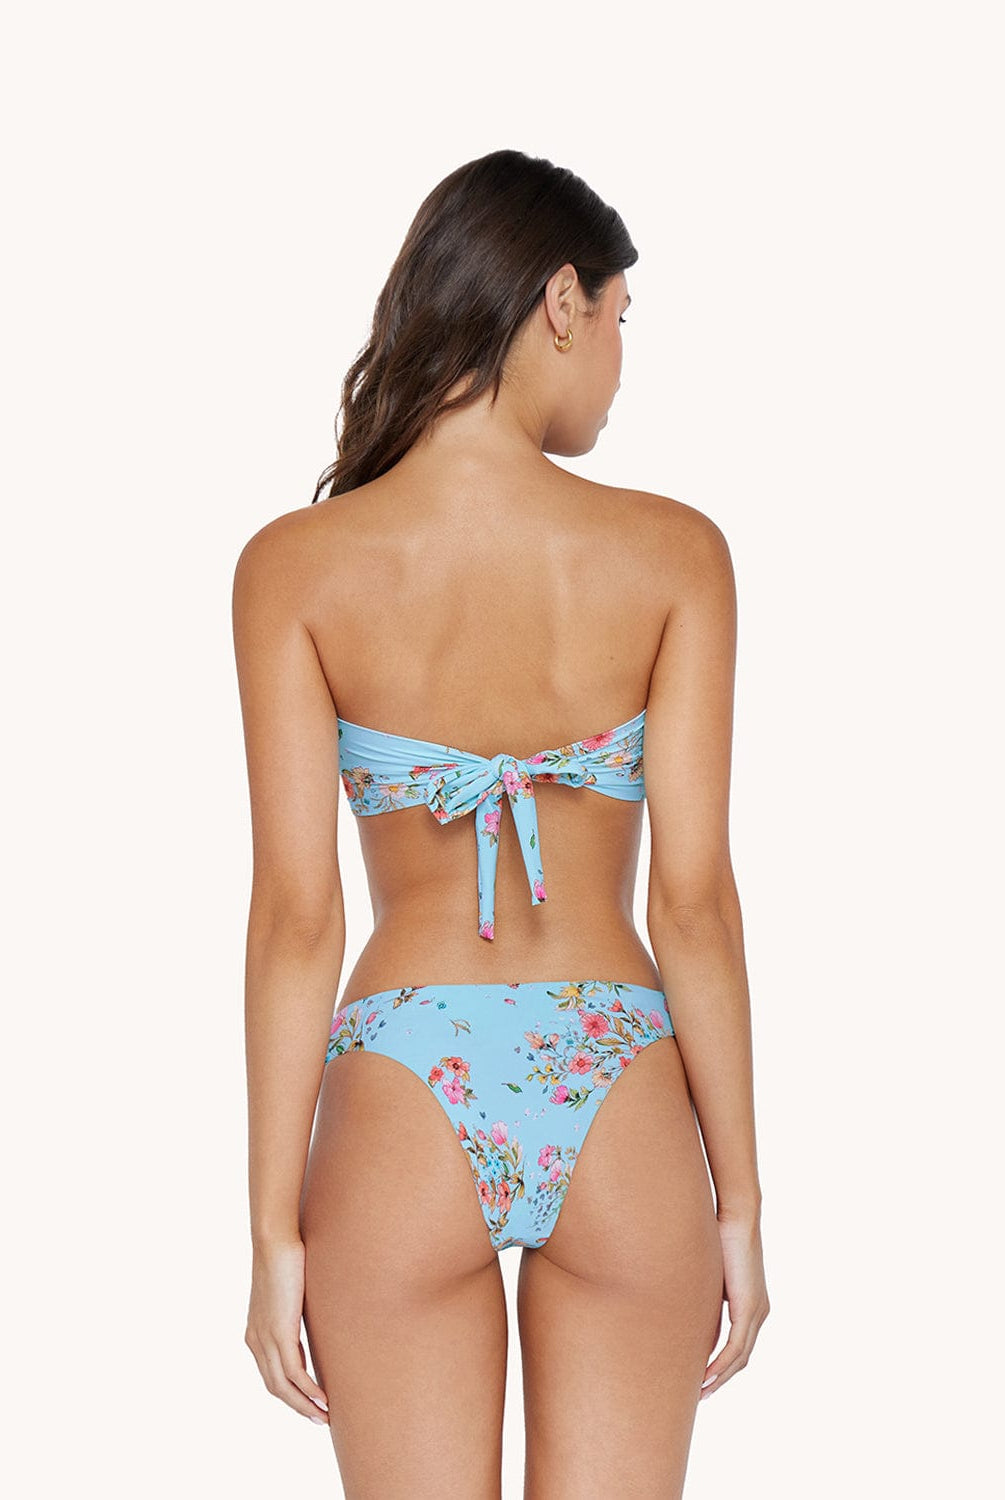 A brunette woman wearing a blue bikini with a floral print facing towards a white walll.